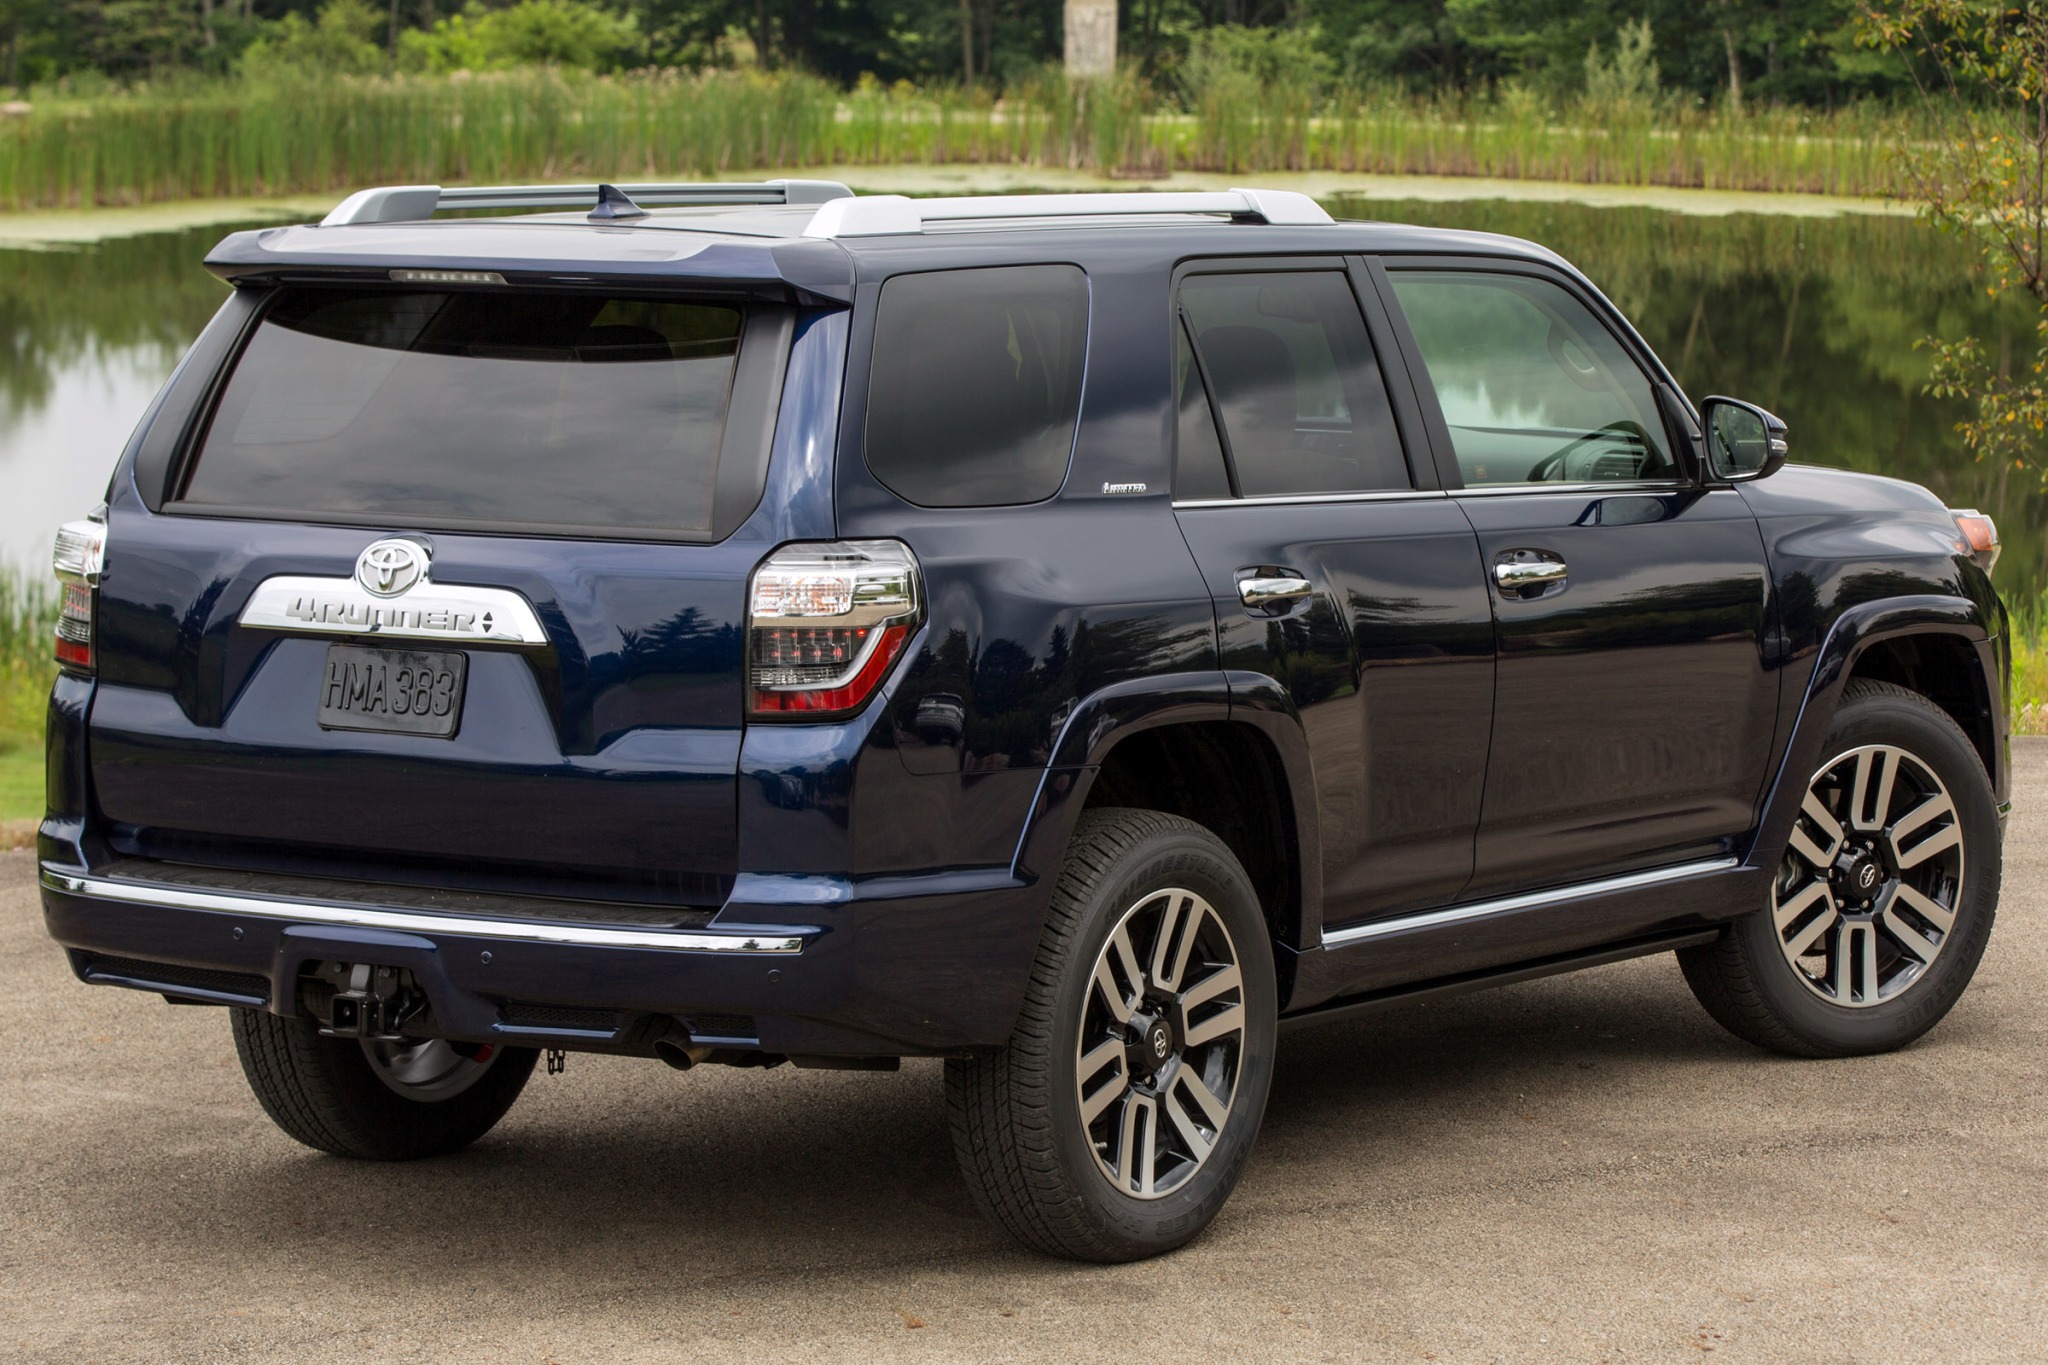 Limited special. Тойота 4runner. Тойота 4 раннер. Тойота 4runner 2014. Тойота 4runner Limited.